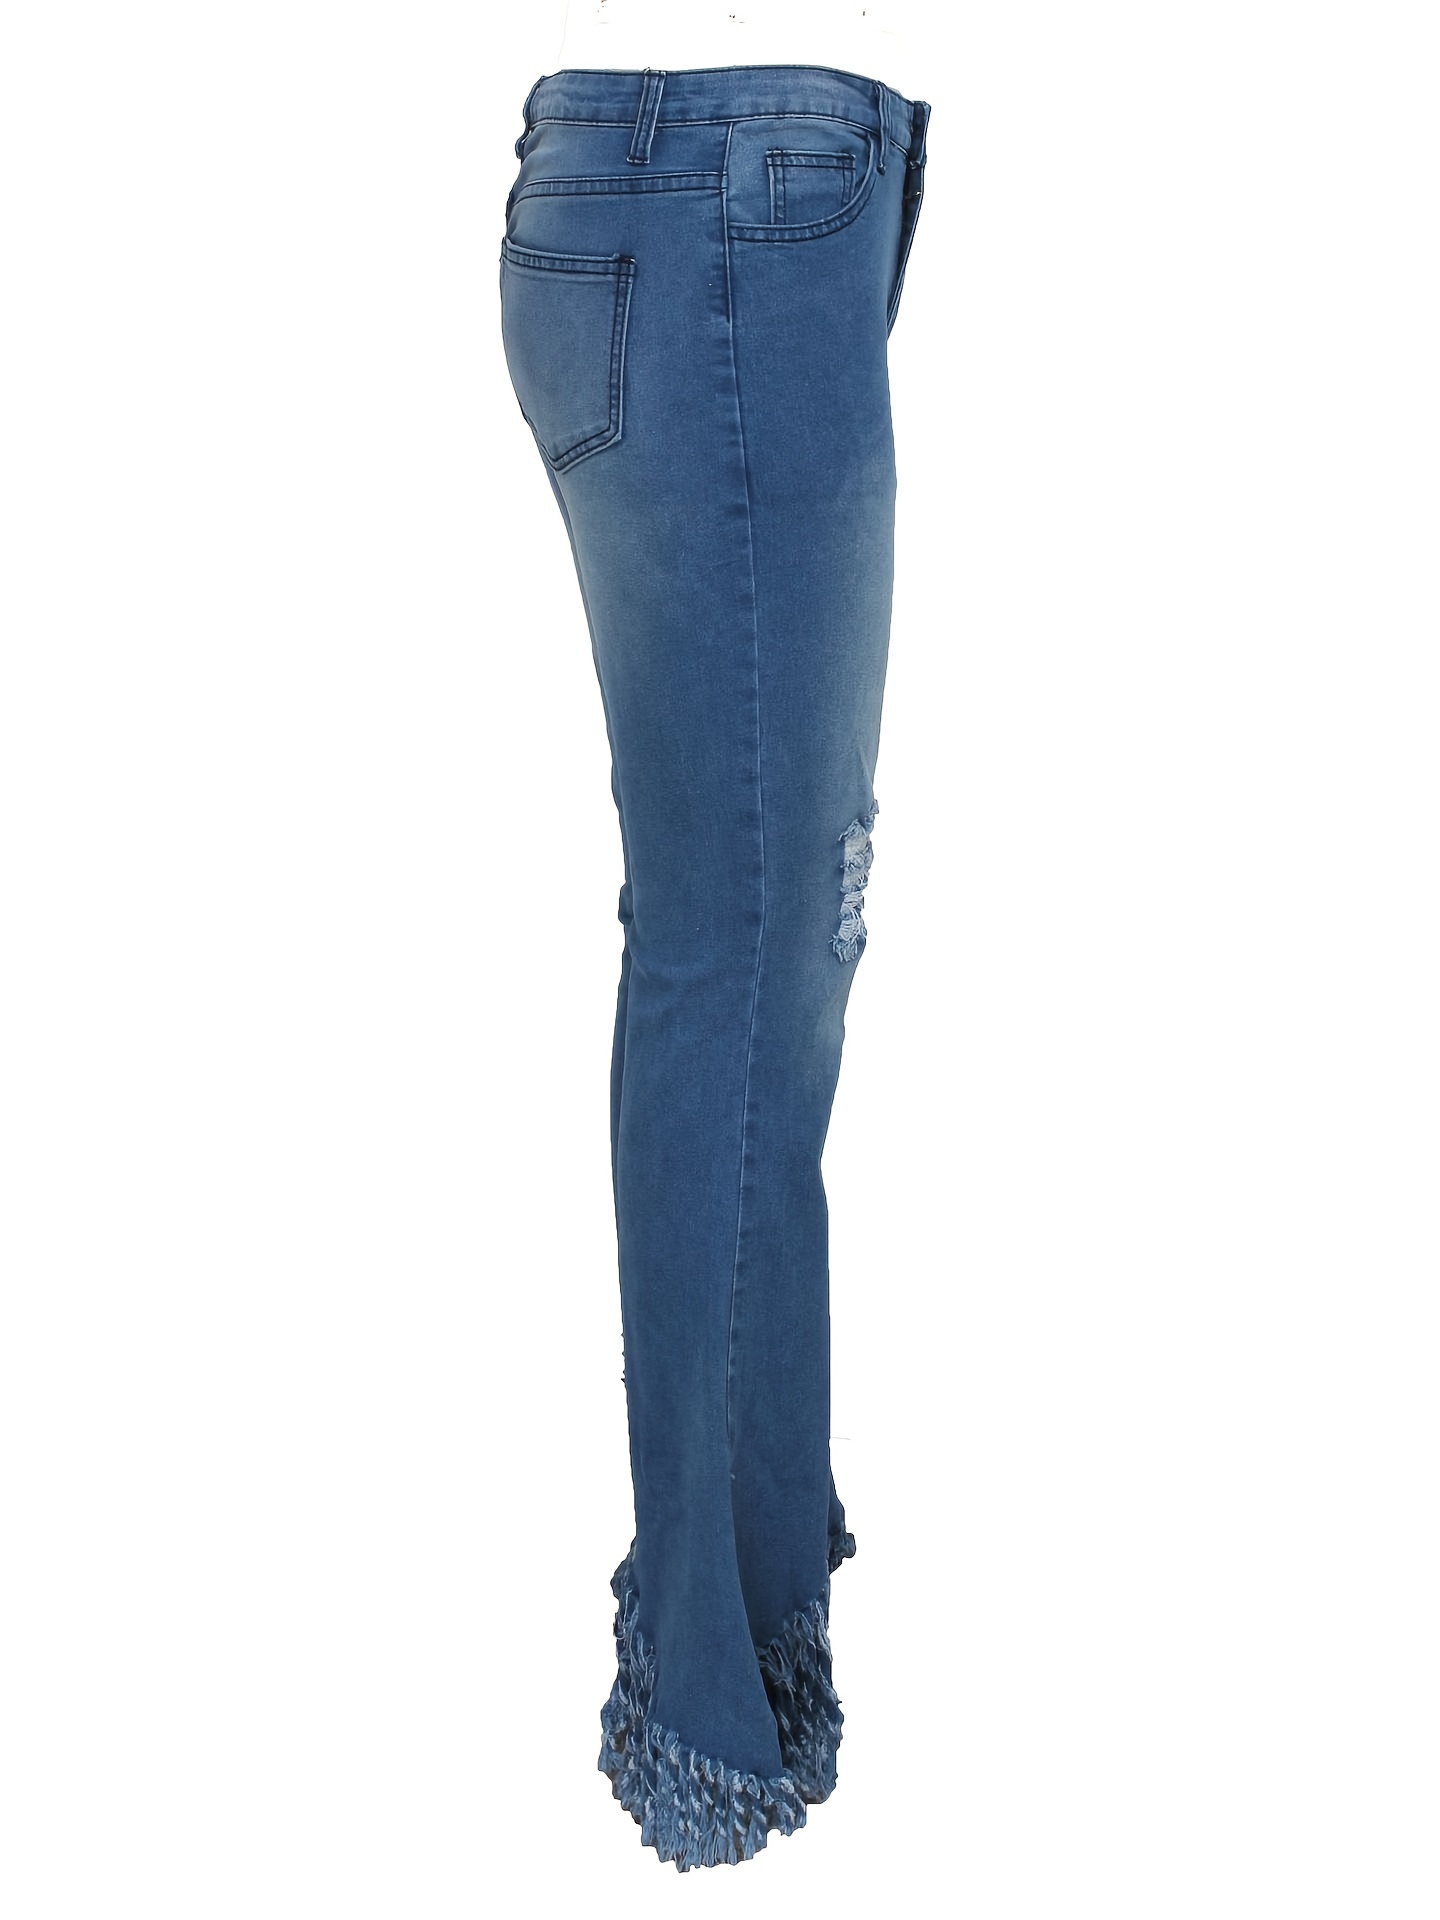 Vintage Striped Flare Jeans With Ripped Holes And Wide Legs For Women Slim  Fit Office Lady Bell Bell Bottom Jeans Outfit Denim Pants LJJA3038 From  Best_bikini, $0.02